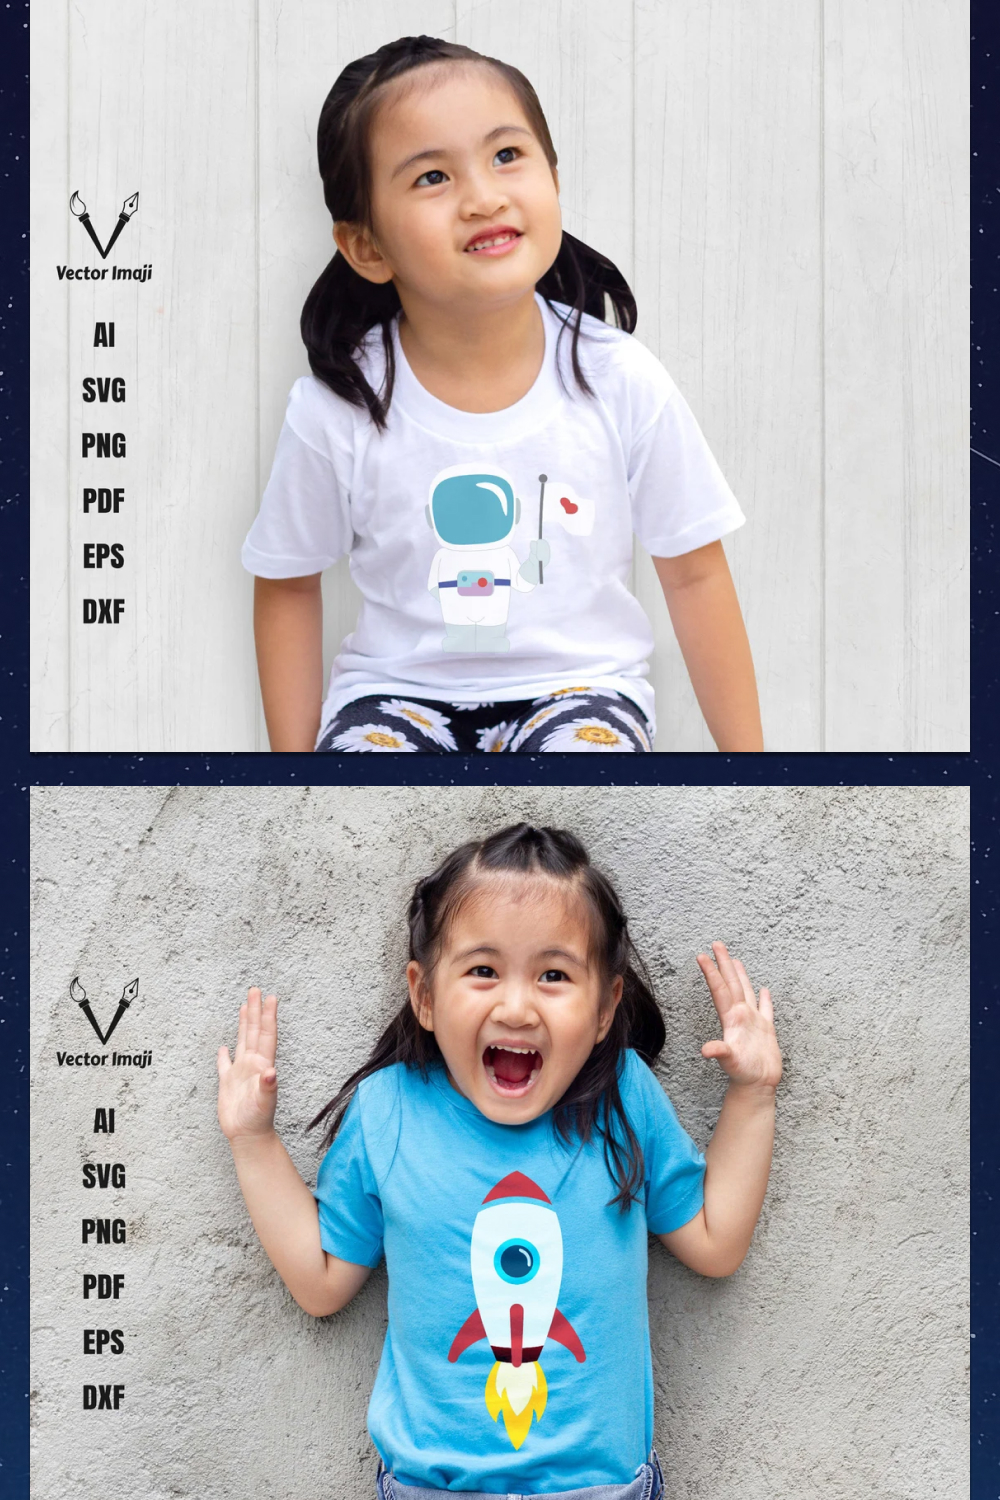 Photos of children with the names of the formats to use.